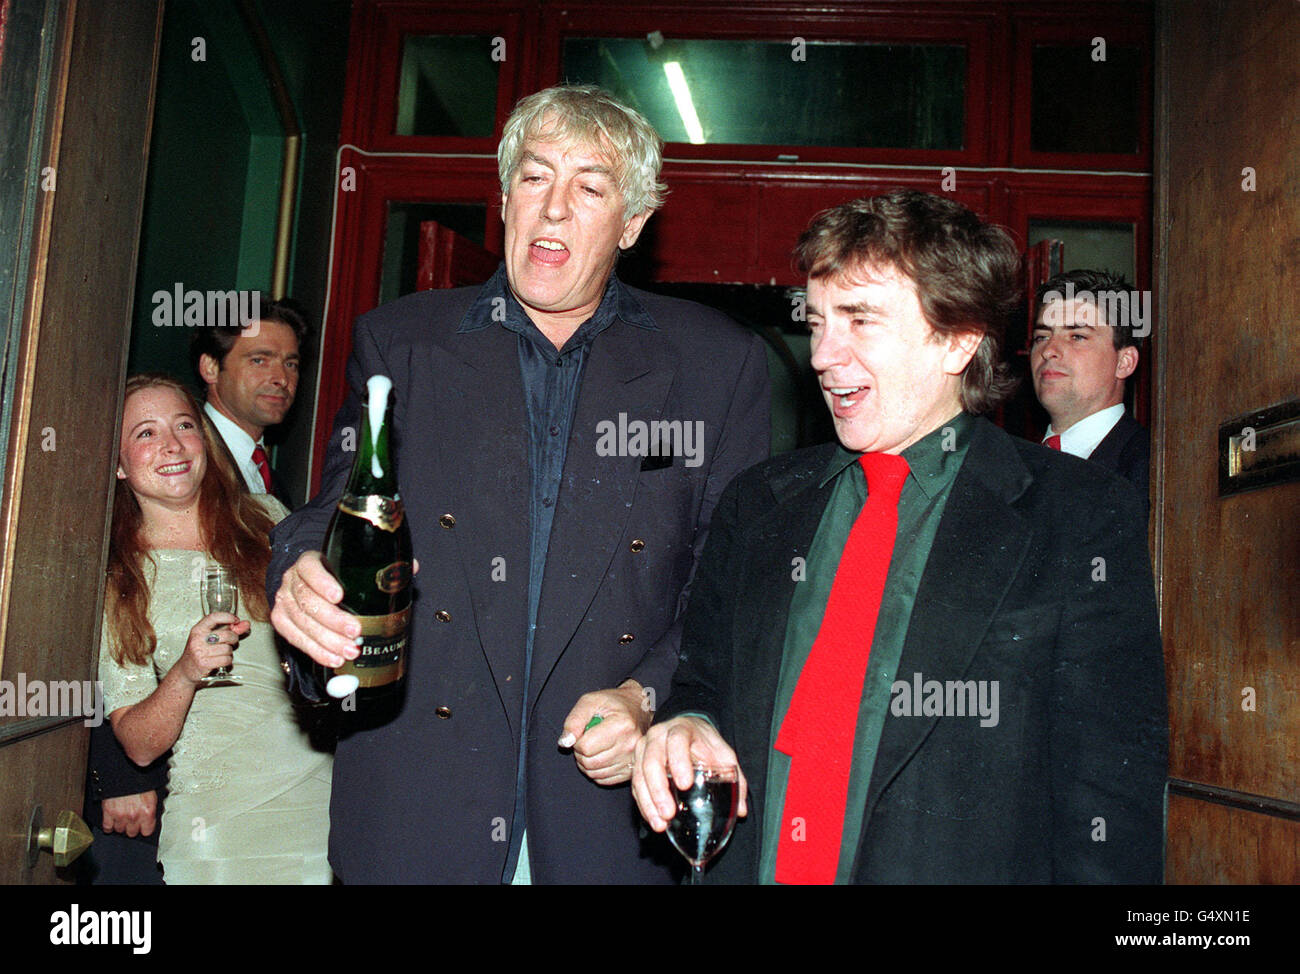 Peter Cook (left) and Dudley Moore open a bottle to celebrate the launch of 'Get The Horn' a video by Derek and Clive at the Cobden working men's club, West London. *27/03/02 Comic duo Peter Cook (left) and Dudley Moore open a bottle to celebrate the launch of 'Get The Horn' a video by Derek and Clive at the Cobden working men's club, West London. British actor Dudley Moore died today, Wednesday 27th March 2002, at his home in New Jersey, aged 66. Moore, who became an unlikely Hollywood heart-throb portraying a cuddly pipsqueak whose charm melted hearts in '10 and Arthur', died of pneumonia Stock Photo